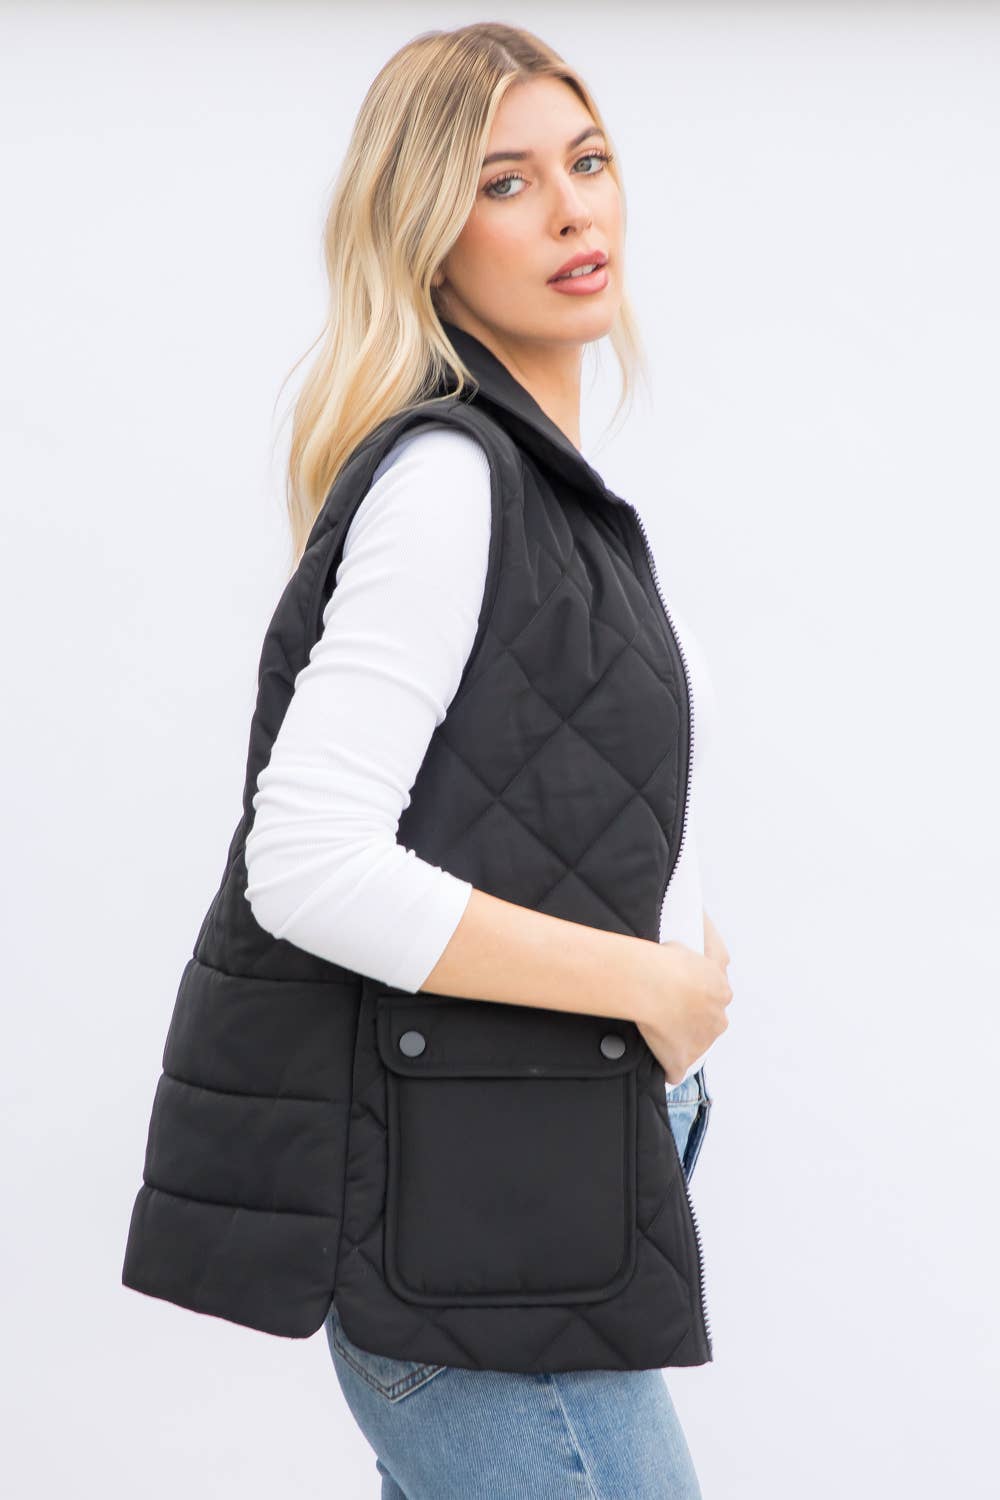 Light Weight Polyfill Quilted Vest: Black by 26 International